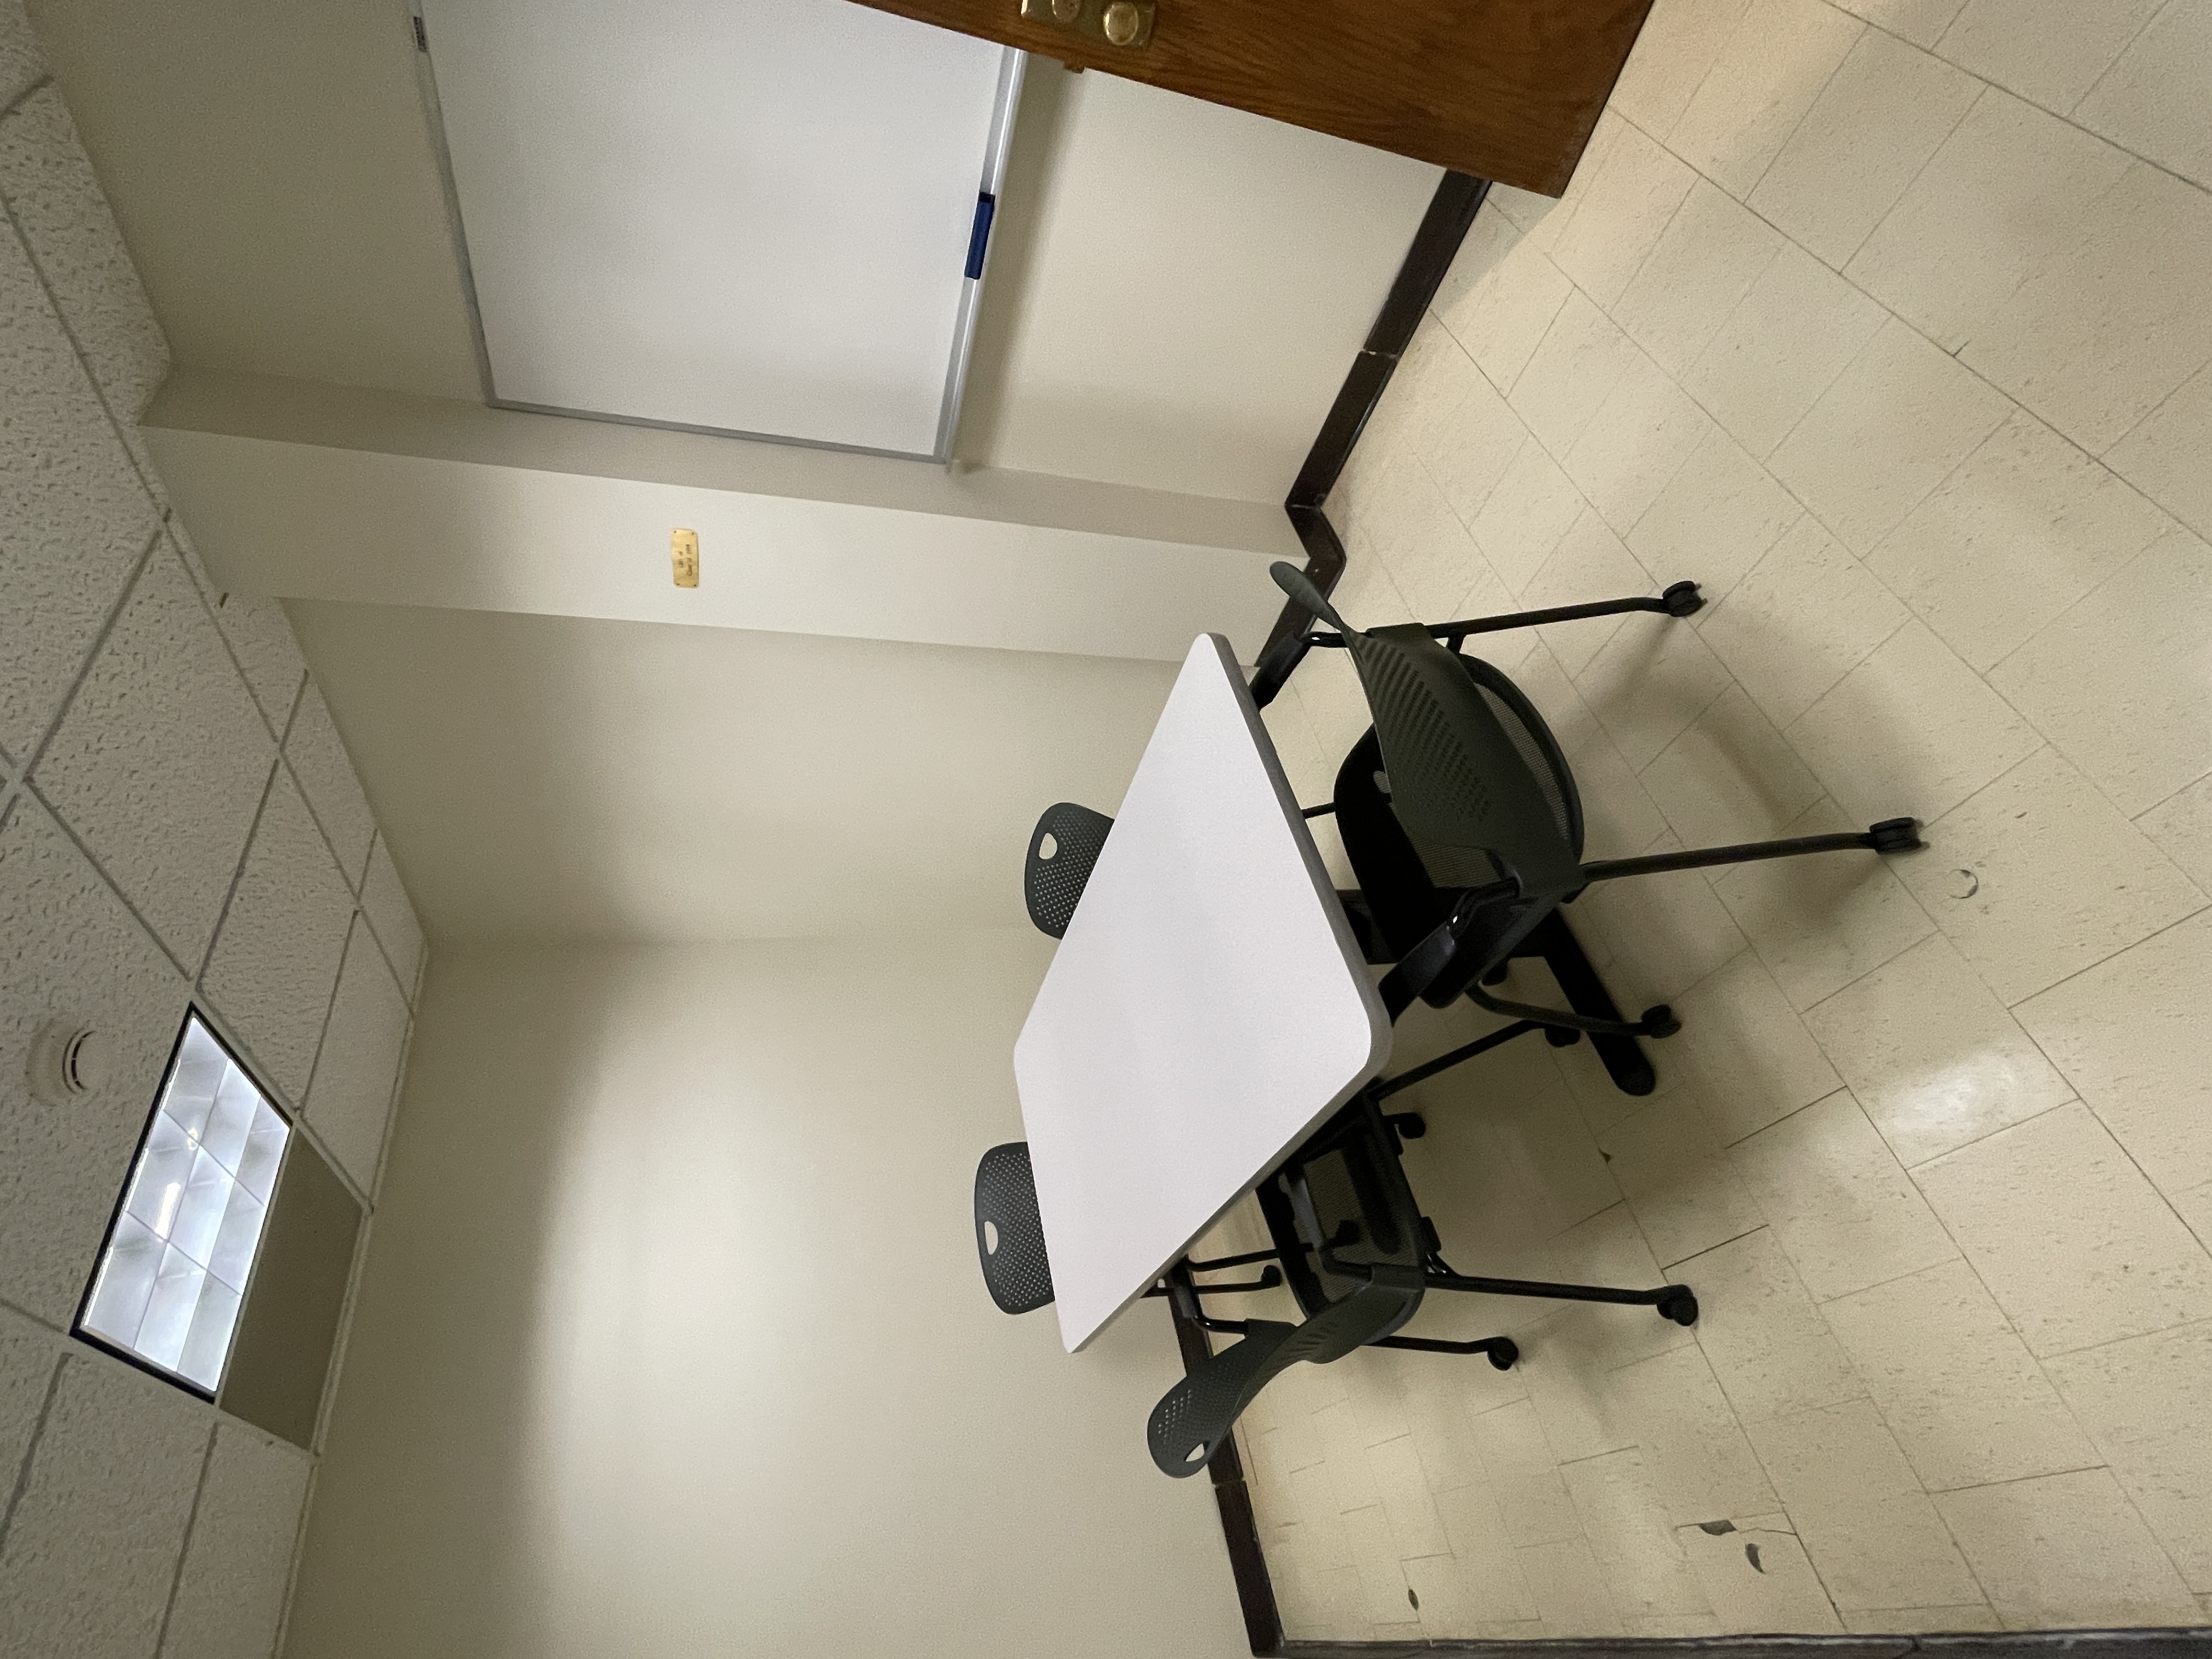 image shows table and 4 chairs, white board on wall